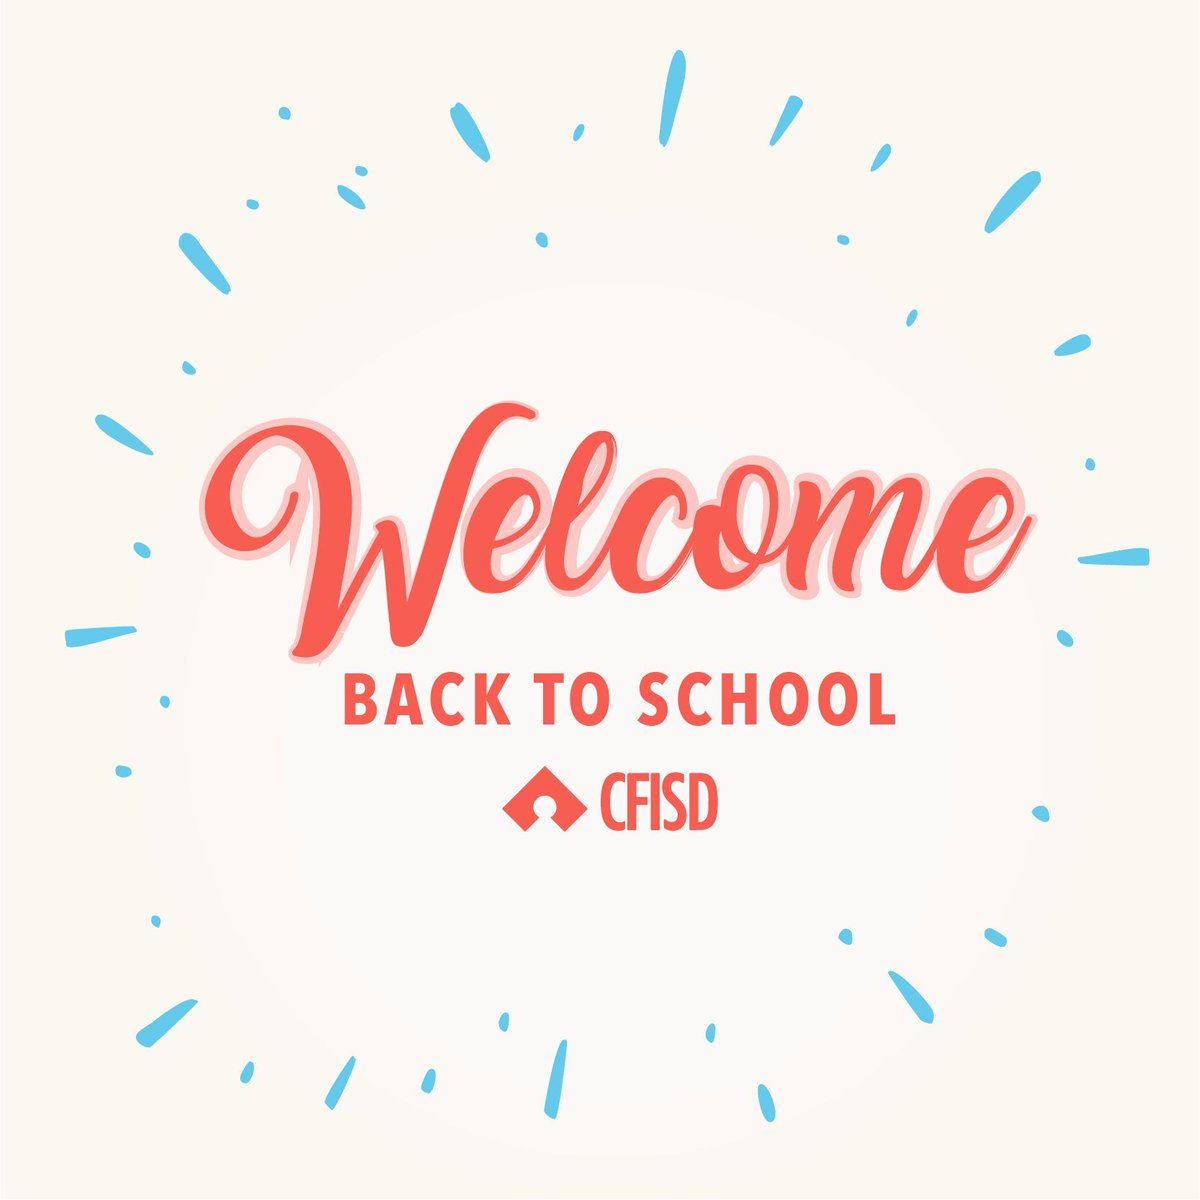 Welcome back, CFISD -- let's have a great spring! #CFISDspirit